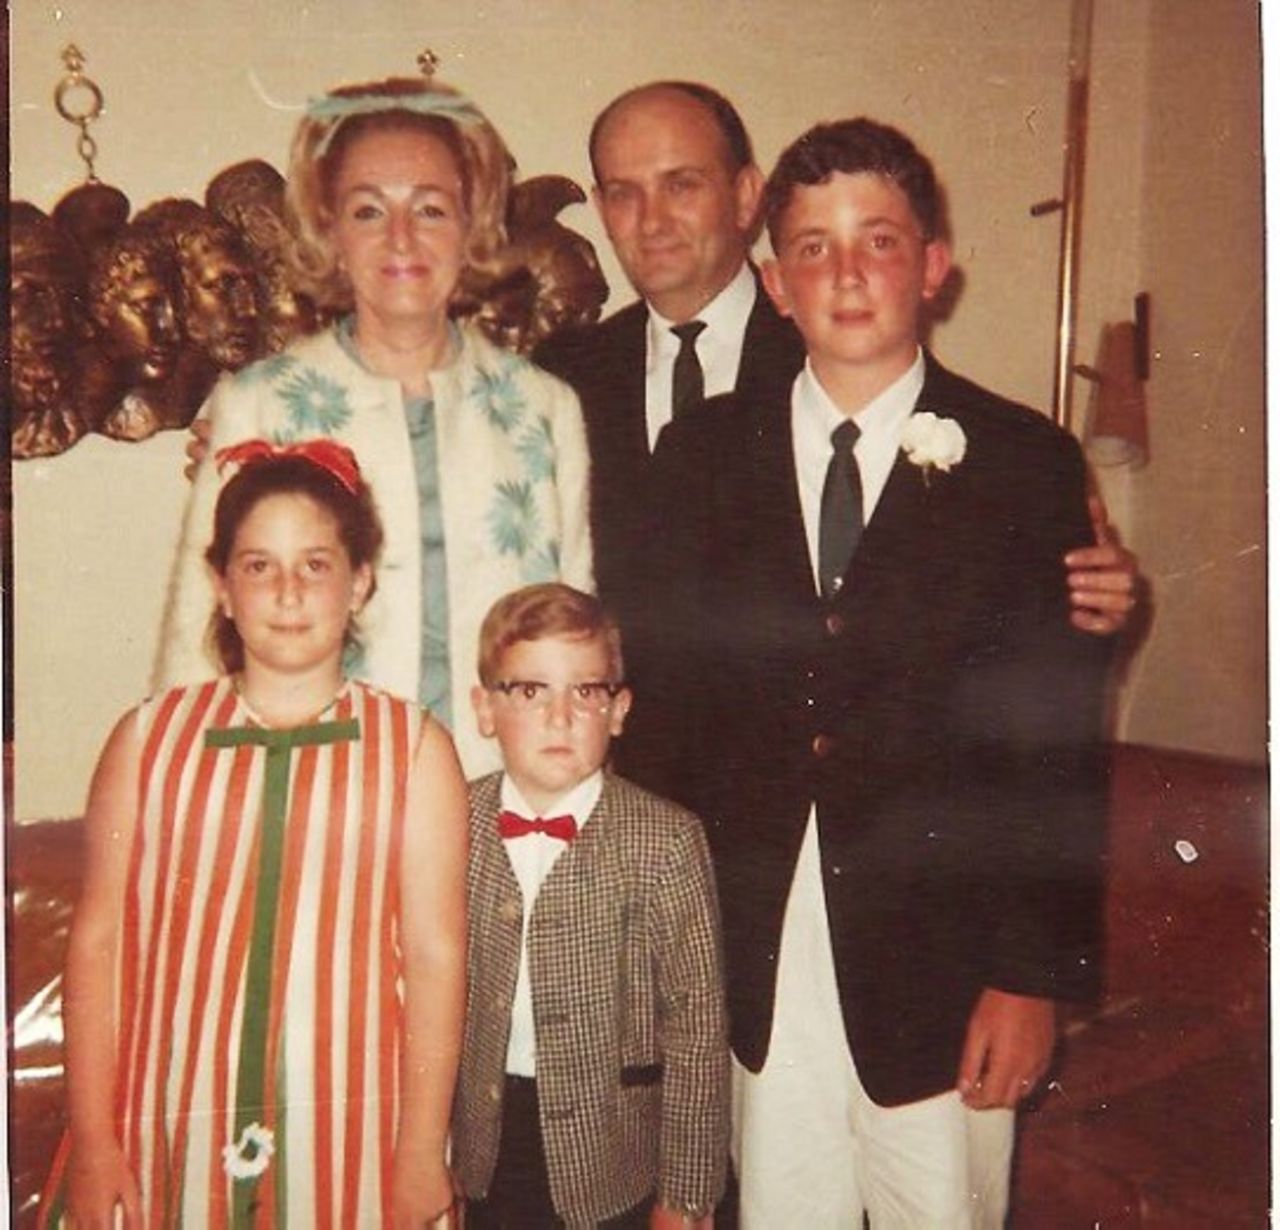 Miami resident <a href="http://ireport.cnn.com/docs/DOC-1118004">Craig Riegelhaupt</a> recalls taking this "nerdy family" photo when they moved to the city in 1967. "The bows in my mother's and sister's hair, and my red bow tie and horn-rimmed glasses epitomize the look of the 1960s."